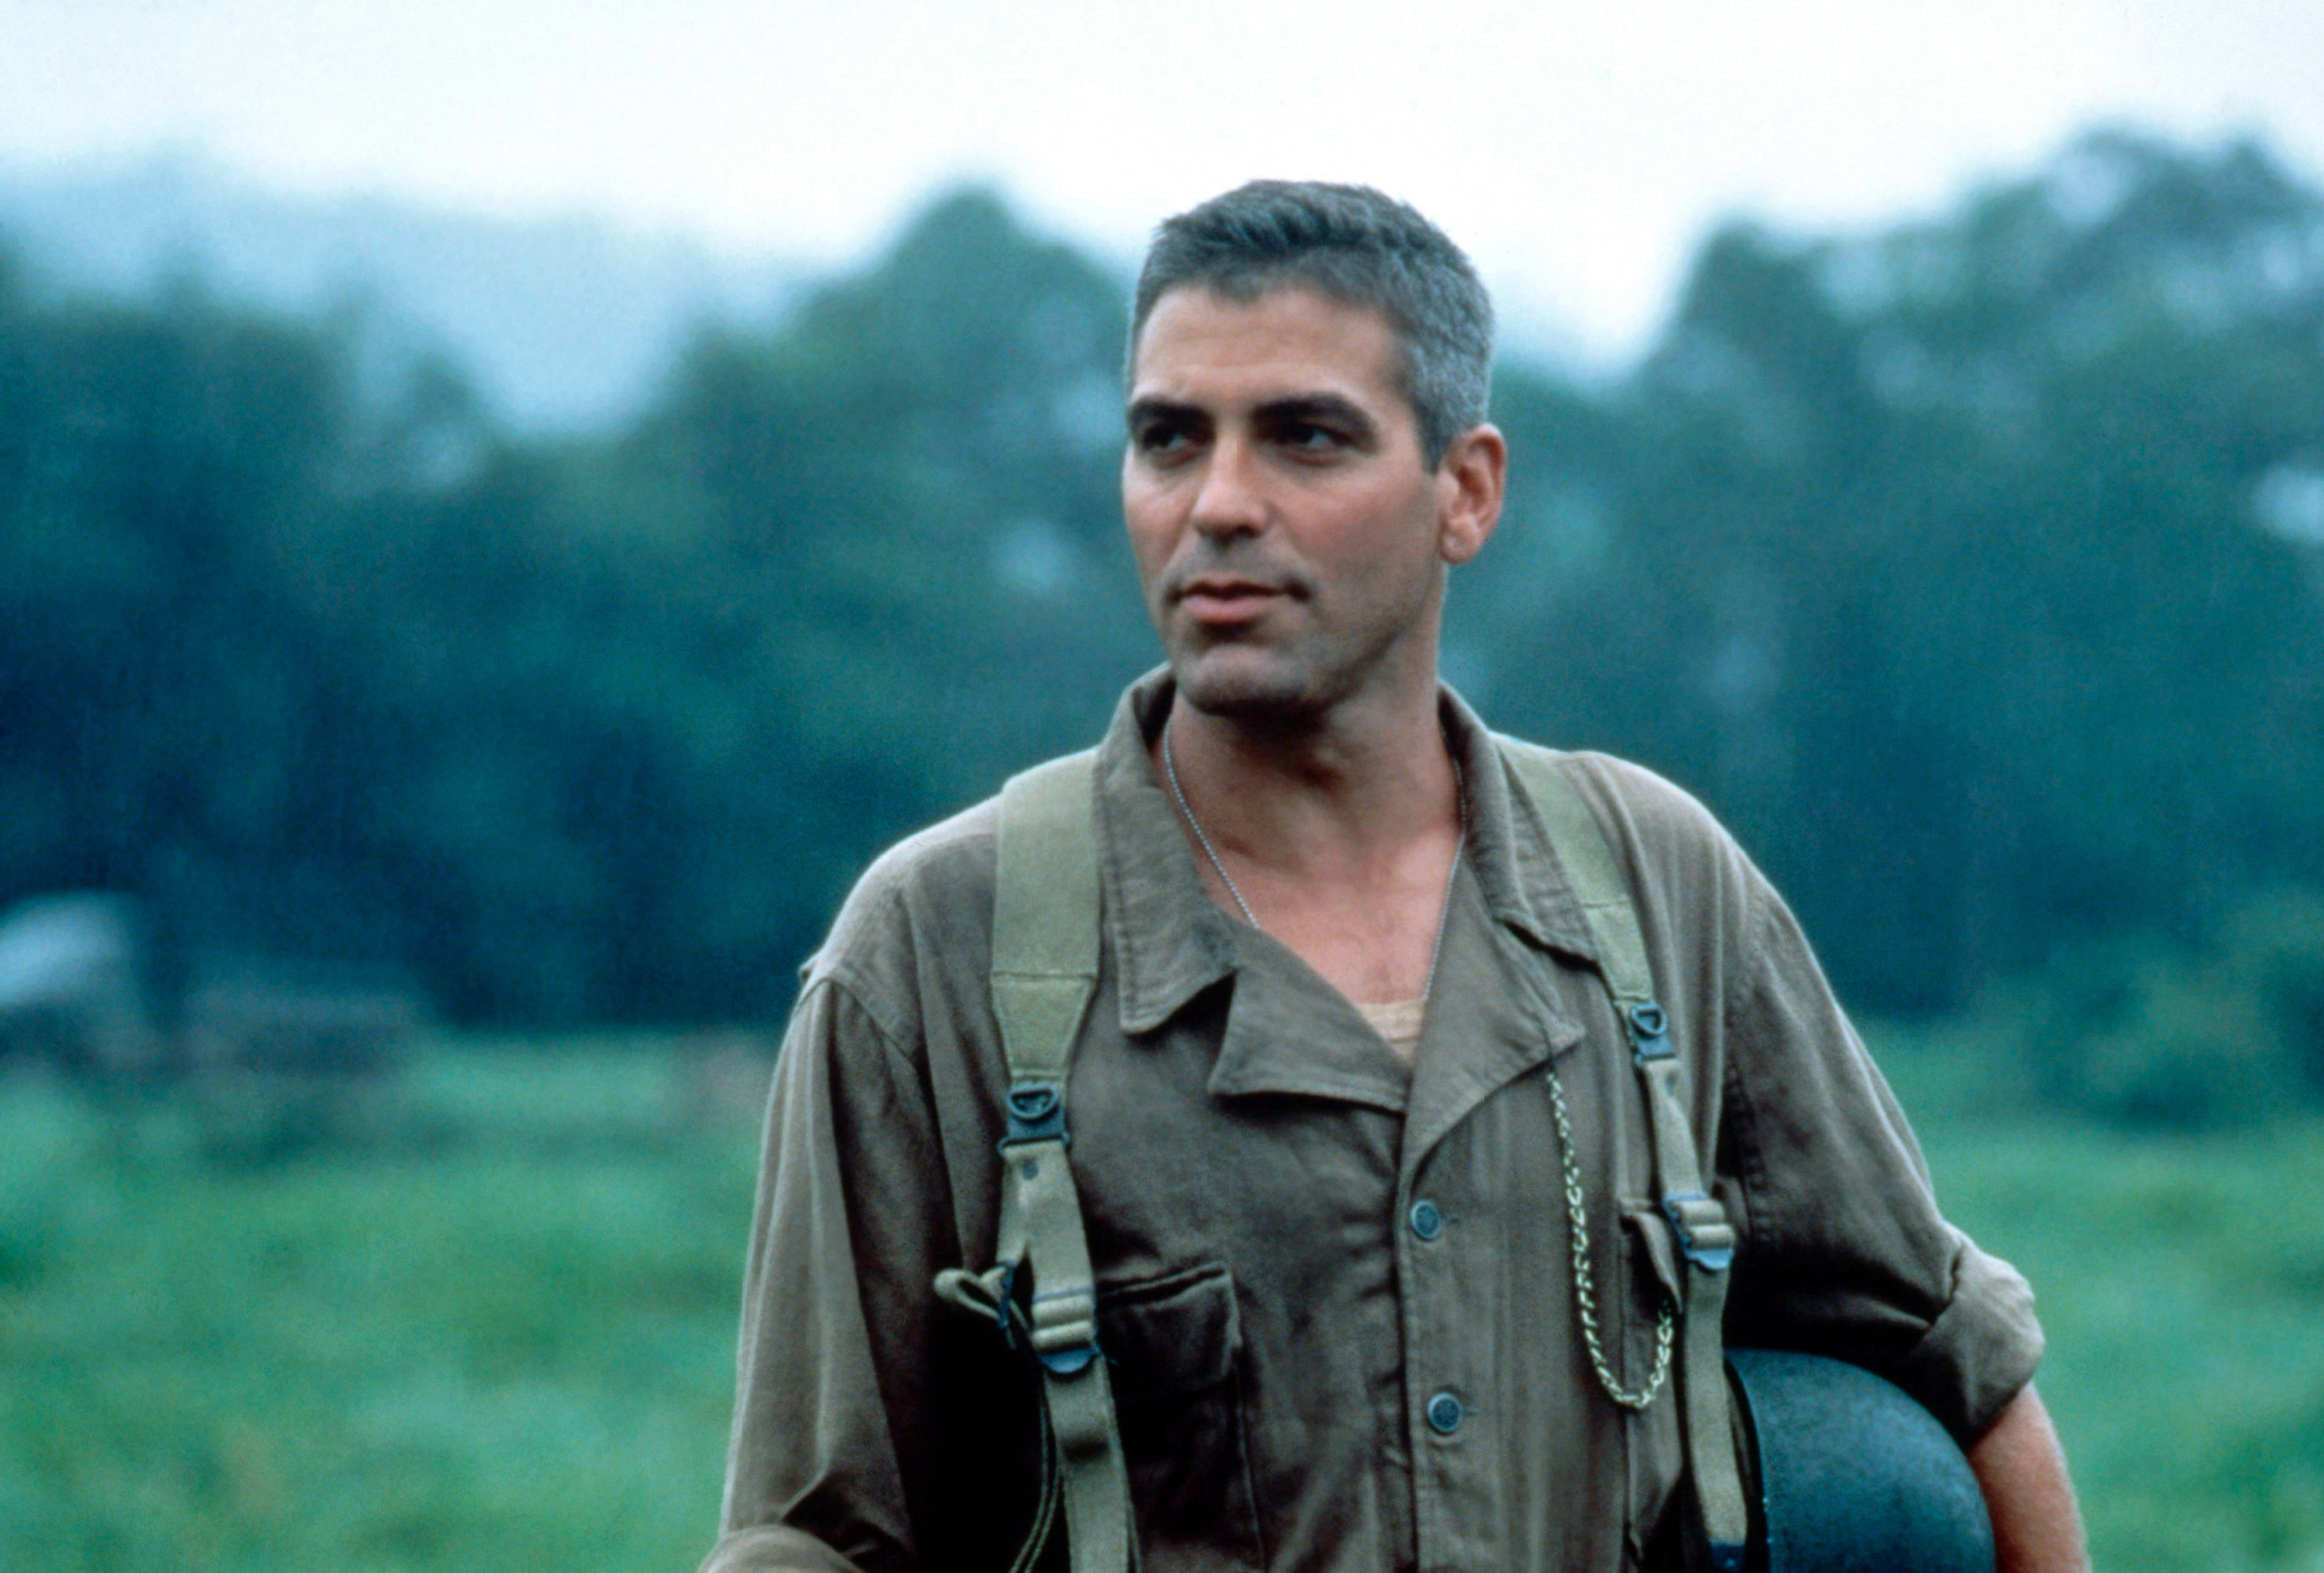 George Clooney stands in a field in an Army uniform